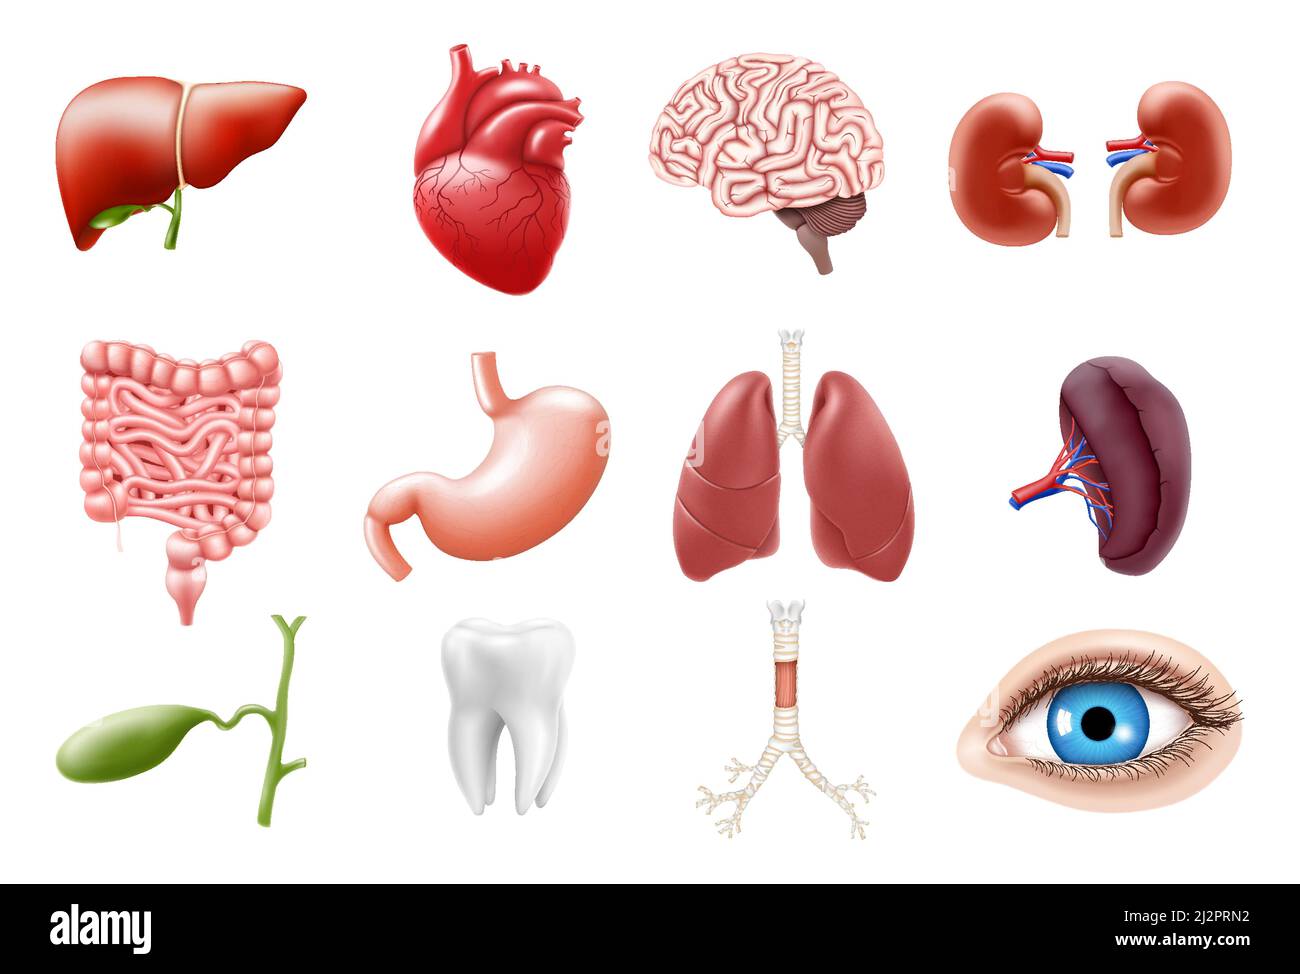 Human internal organs isolated on white background. Lungs, kidneys, stomach, intestines, brain, heart, spleen, liver, tooth, trachea, gallbladder, eye Stock Vector